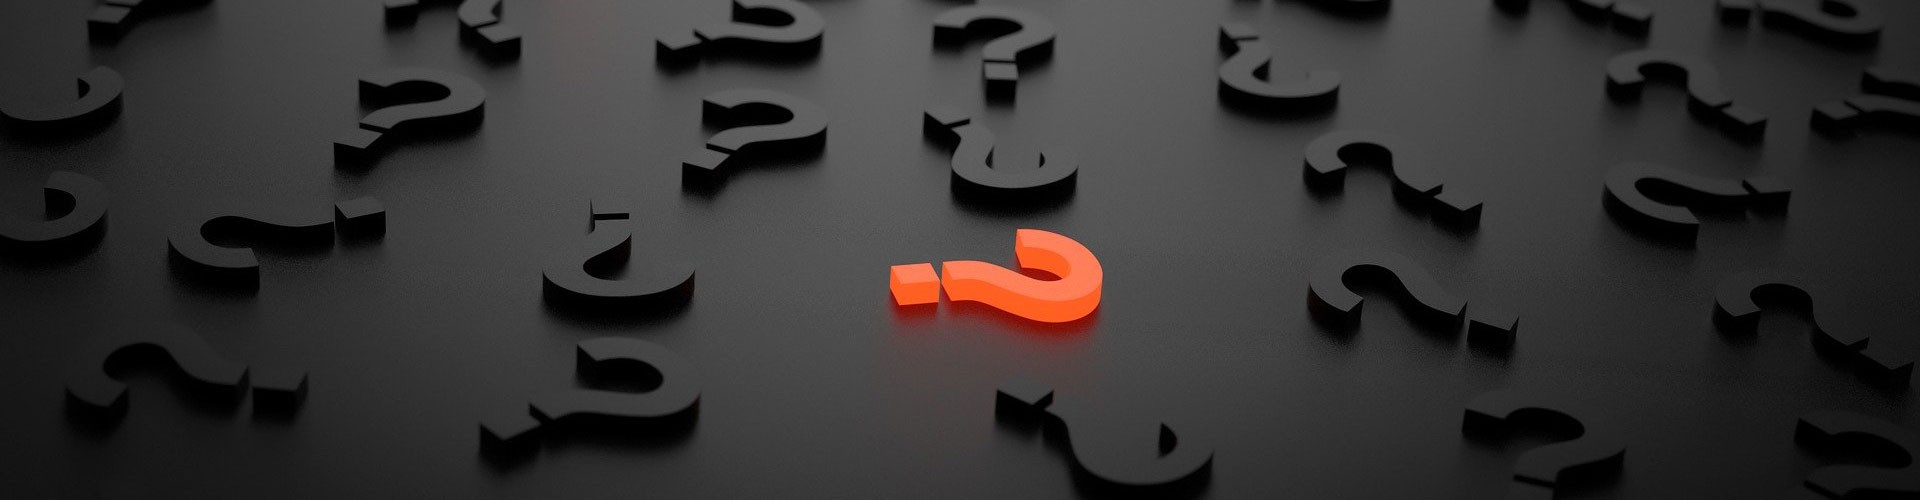 red 3d question mark on black background with black 3d question marks